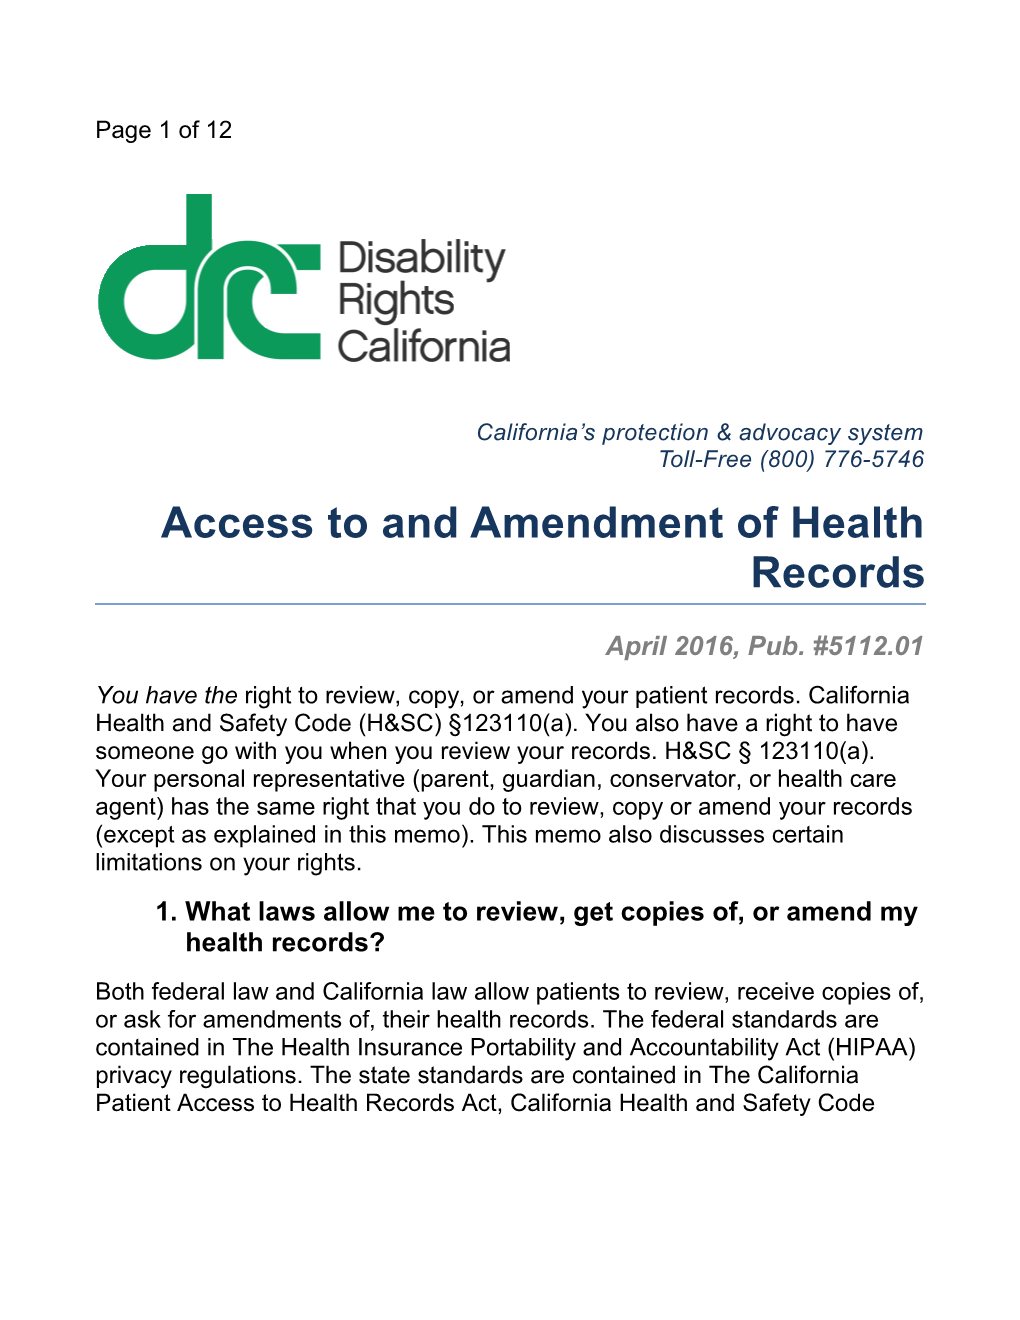 Access to and Amendment of Health Records